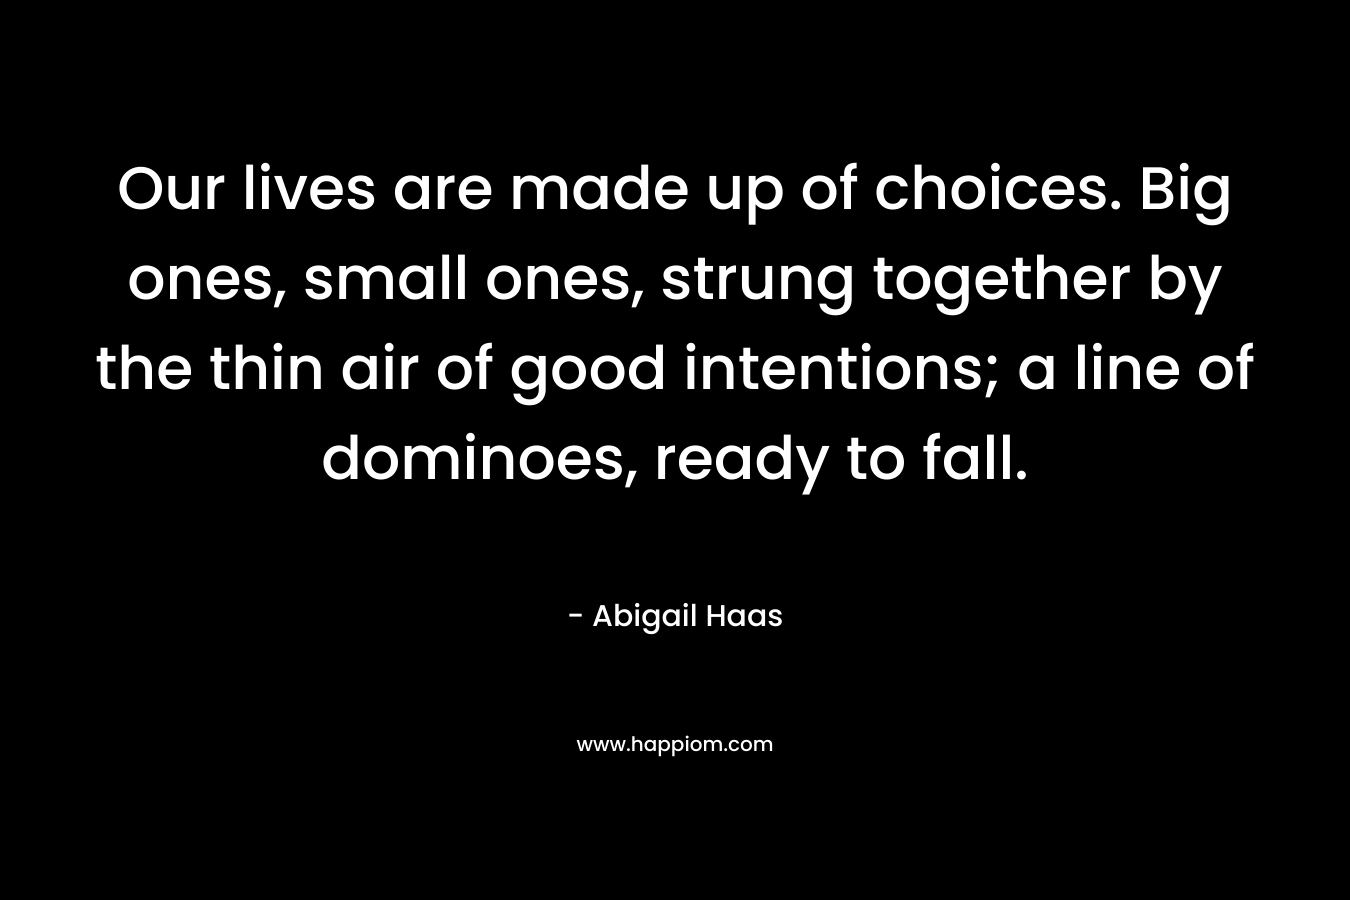 Our lives are made up of choices. Big ones, small ones, strung together by the thin air of good intentions; a line of dominoes, ready to fall. – Abigail Haas